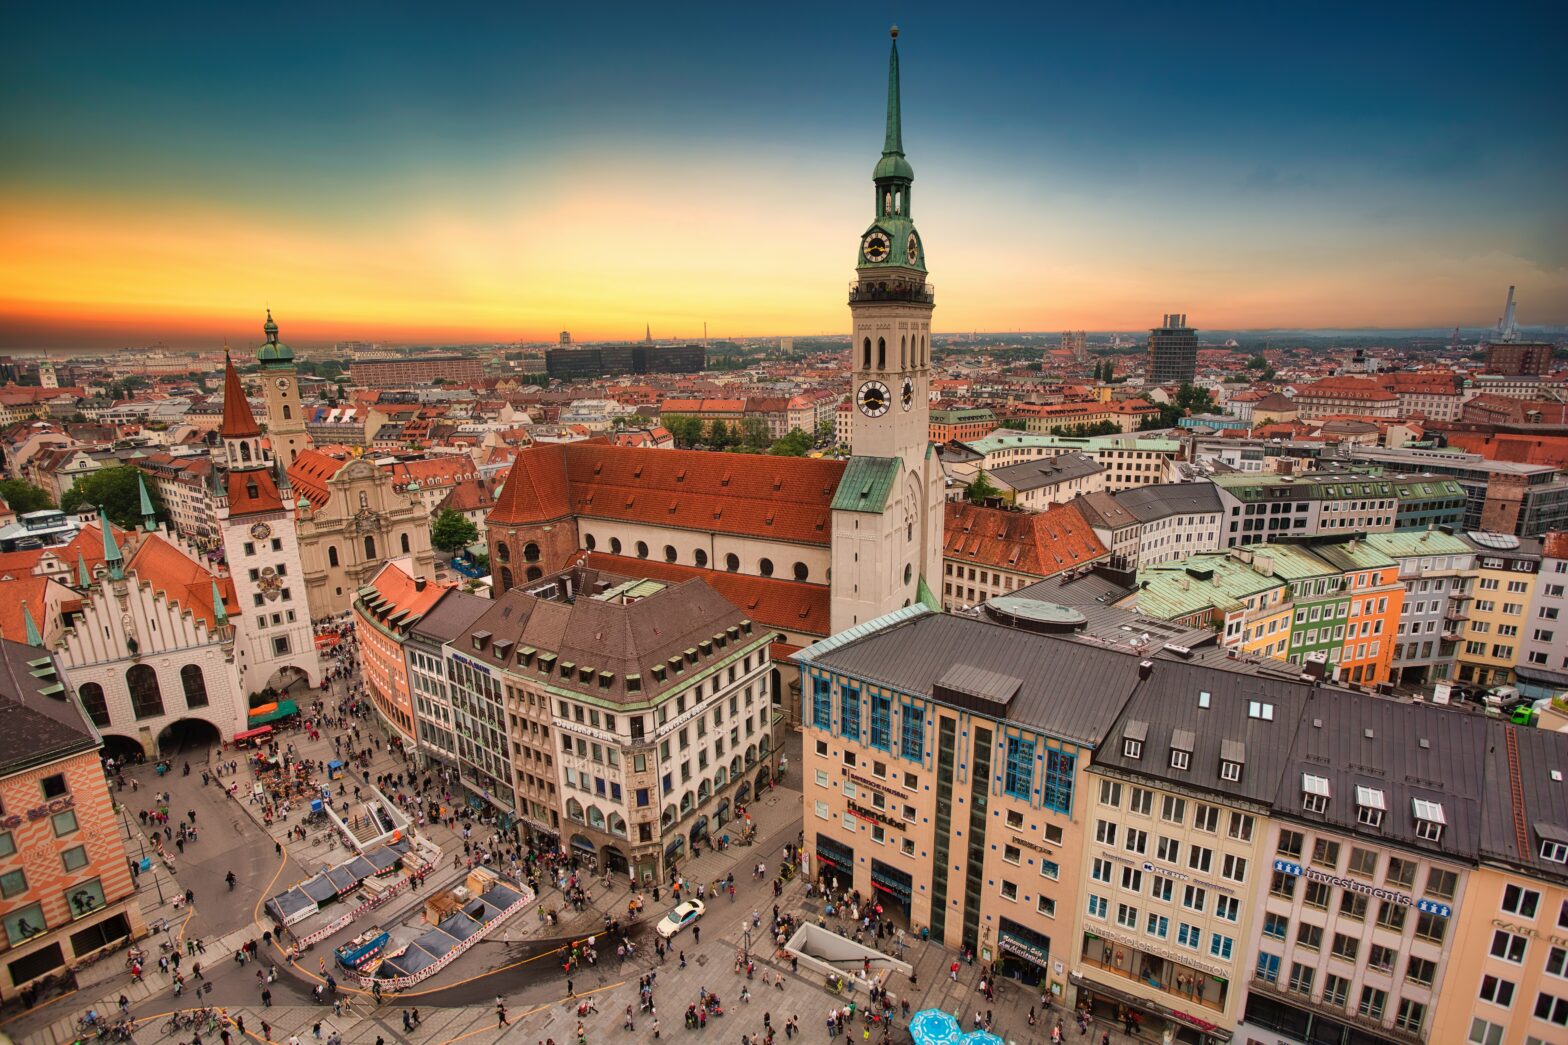 evening sunset over town square in Munich Germany